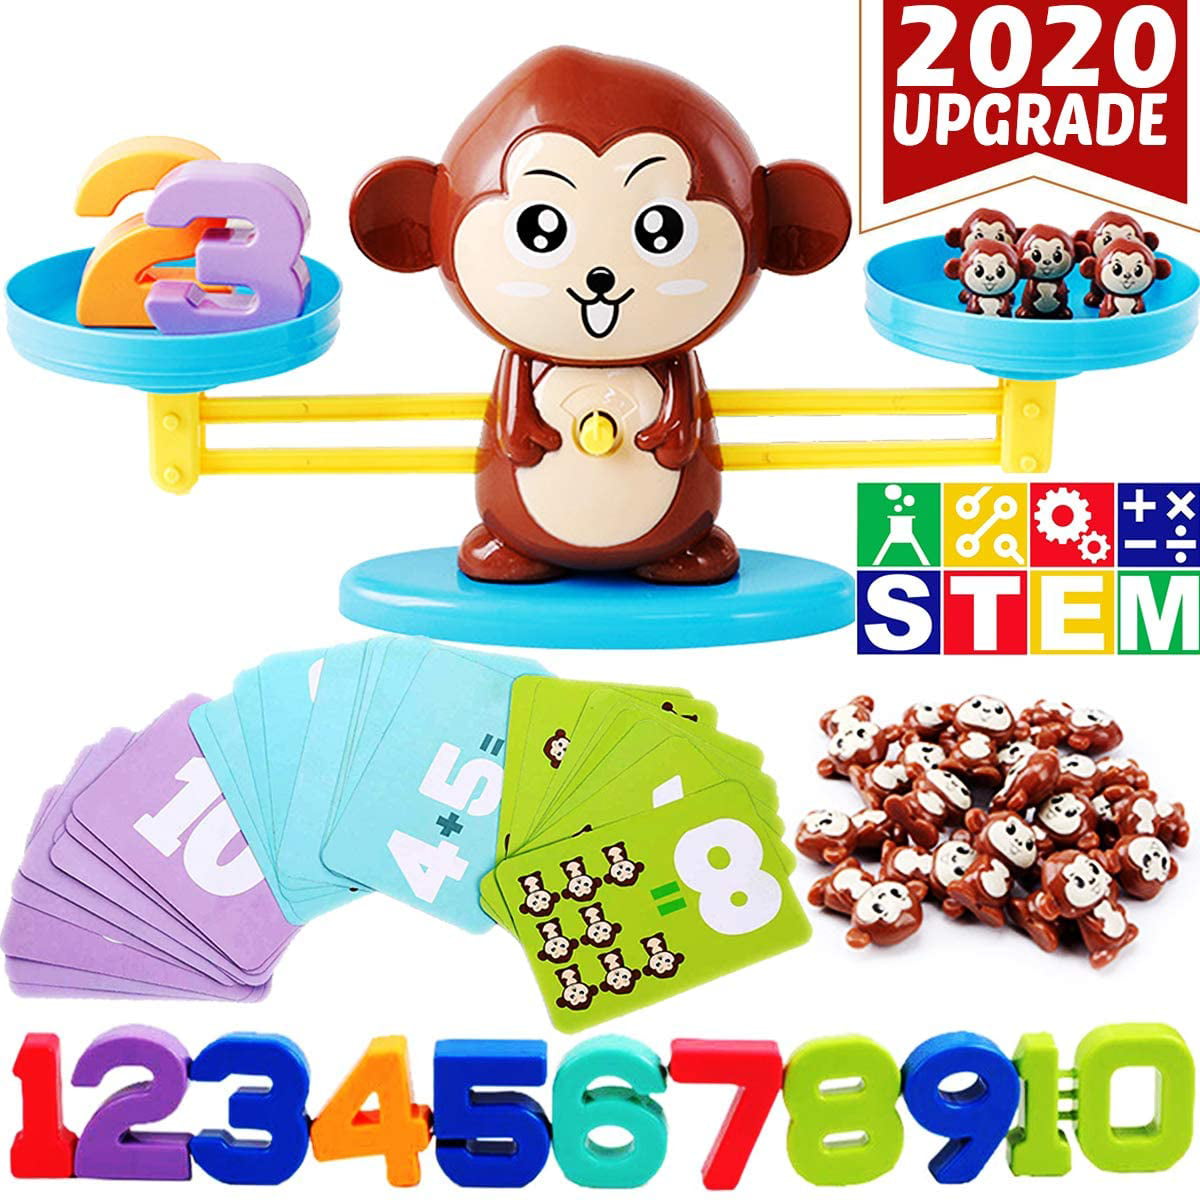 Monkey Balance Cool Math Game Fun Learning Educational Toy Gifts for Kids Boy L 